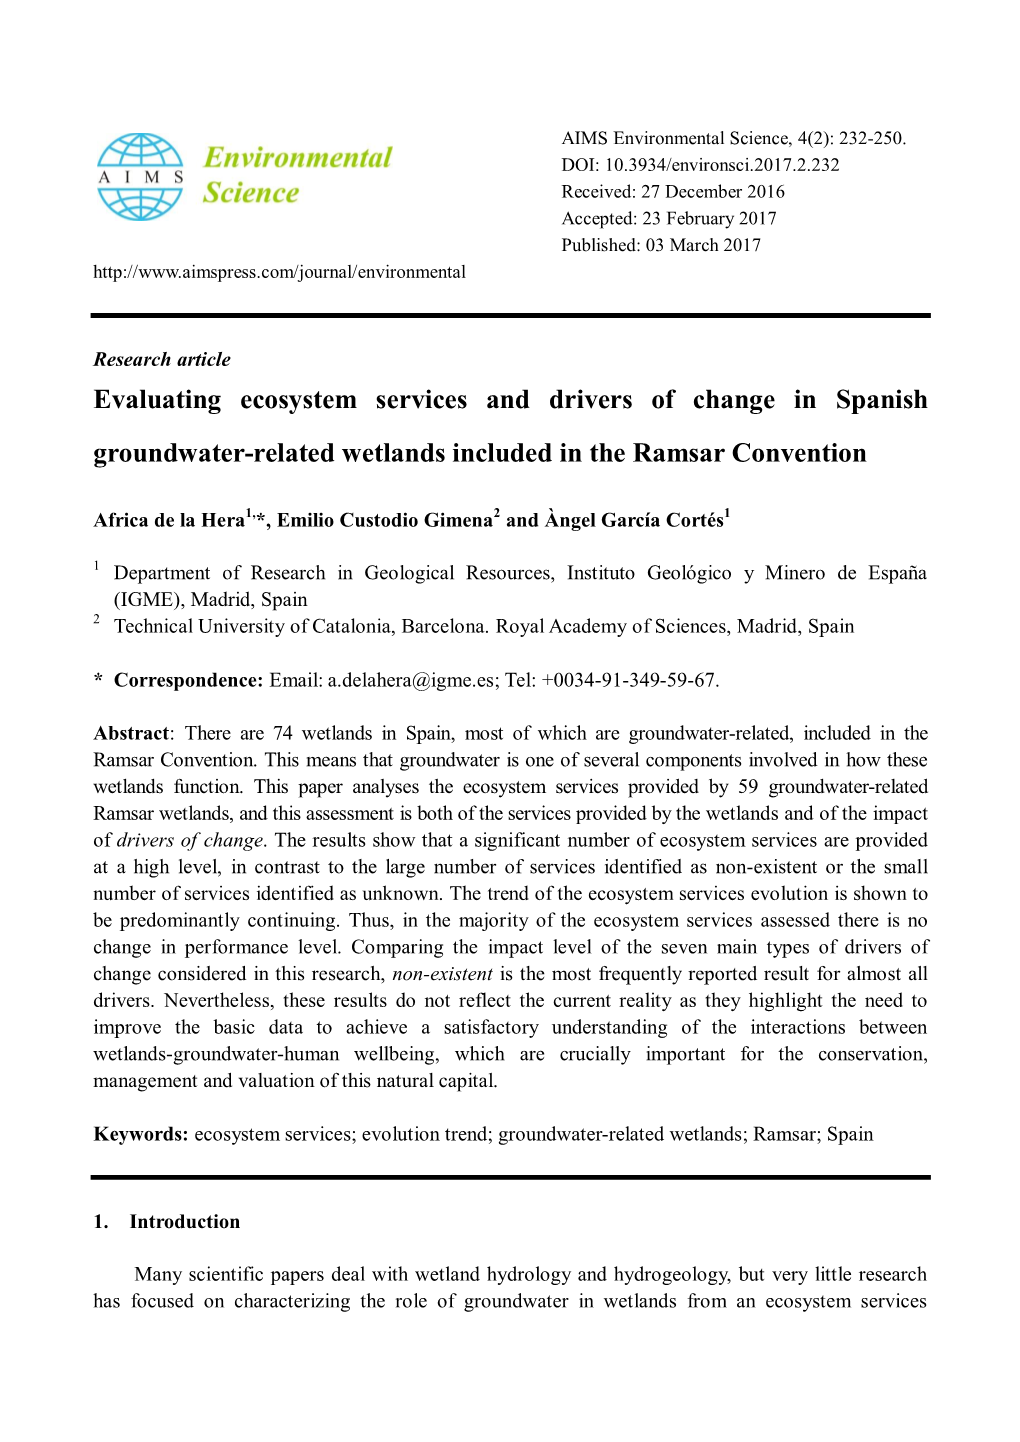 Evaluating Ecosystem Services and Drivers of Change in Spanish Groundwater-Related Wetlands Included in the Ramsar Convention